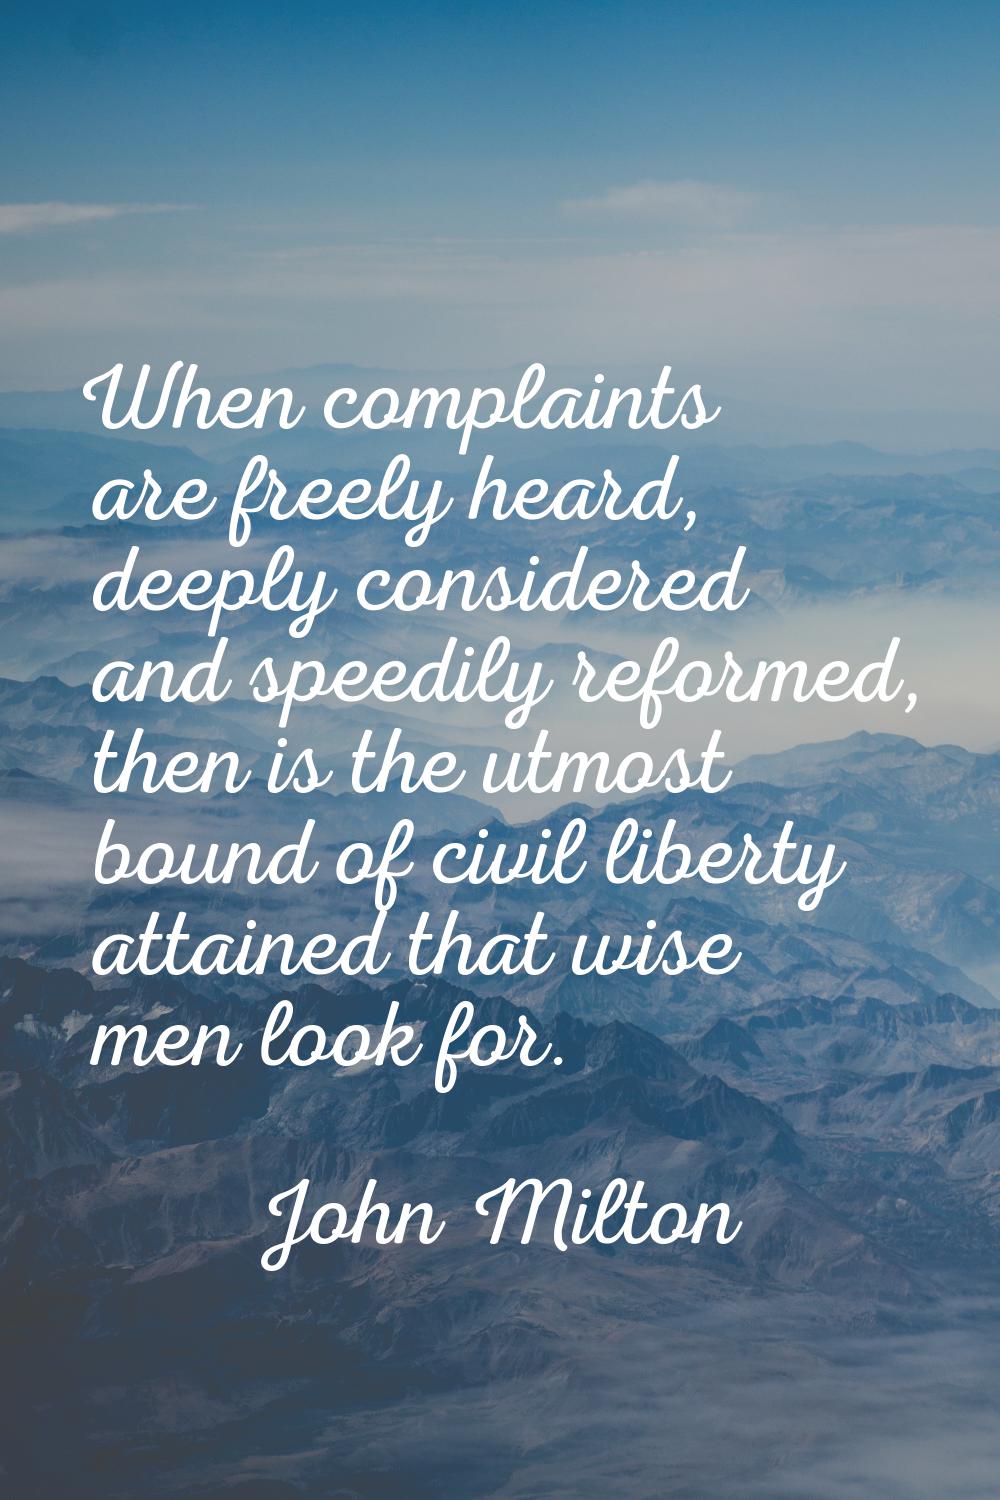 When complaints are freely heard, deeply considered and speedily reformed, then is the utmost bound